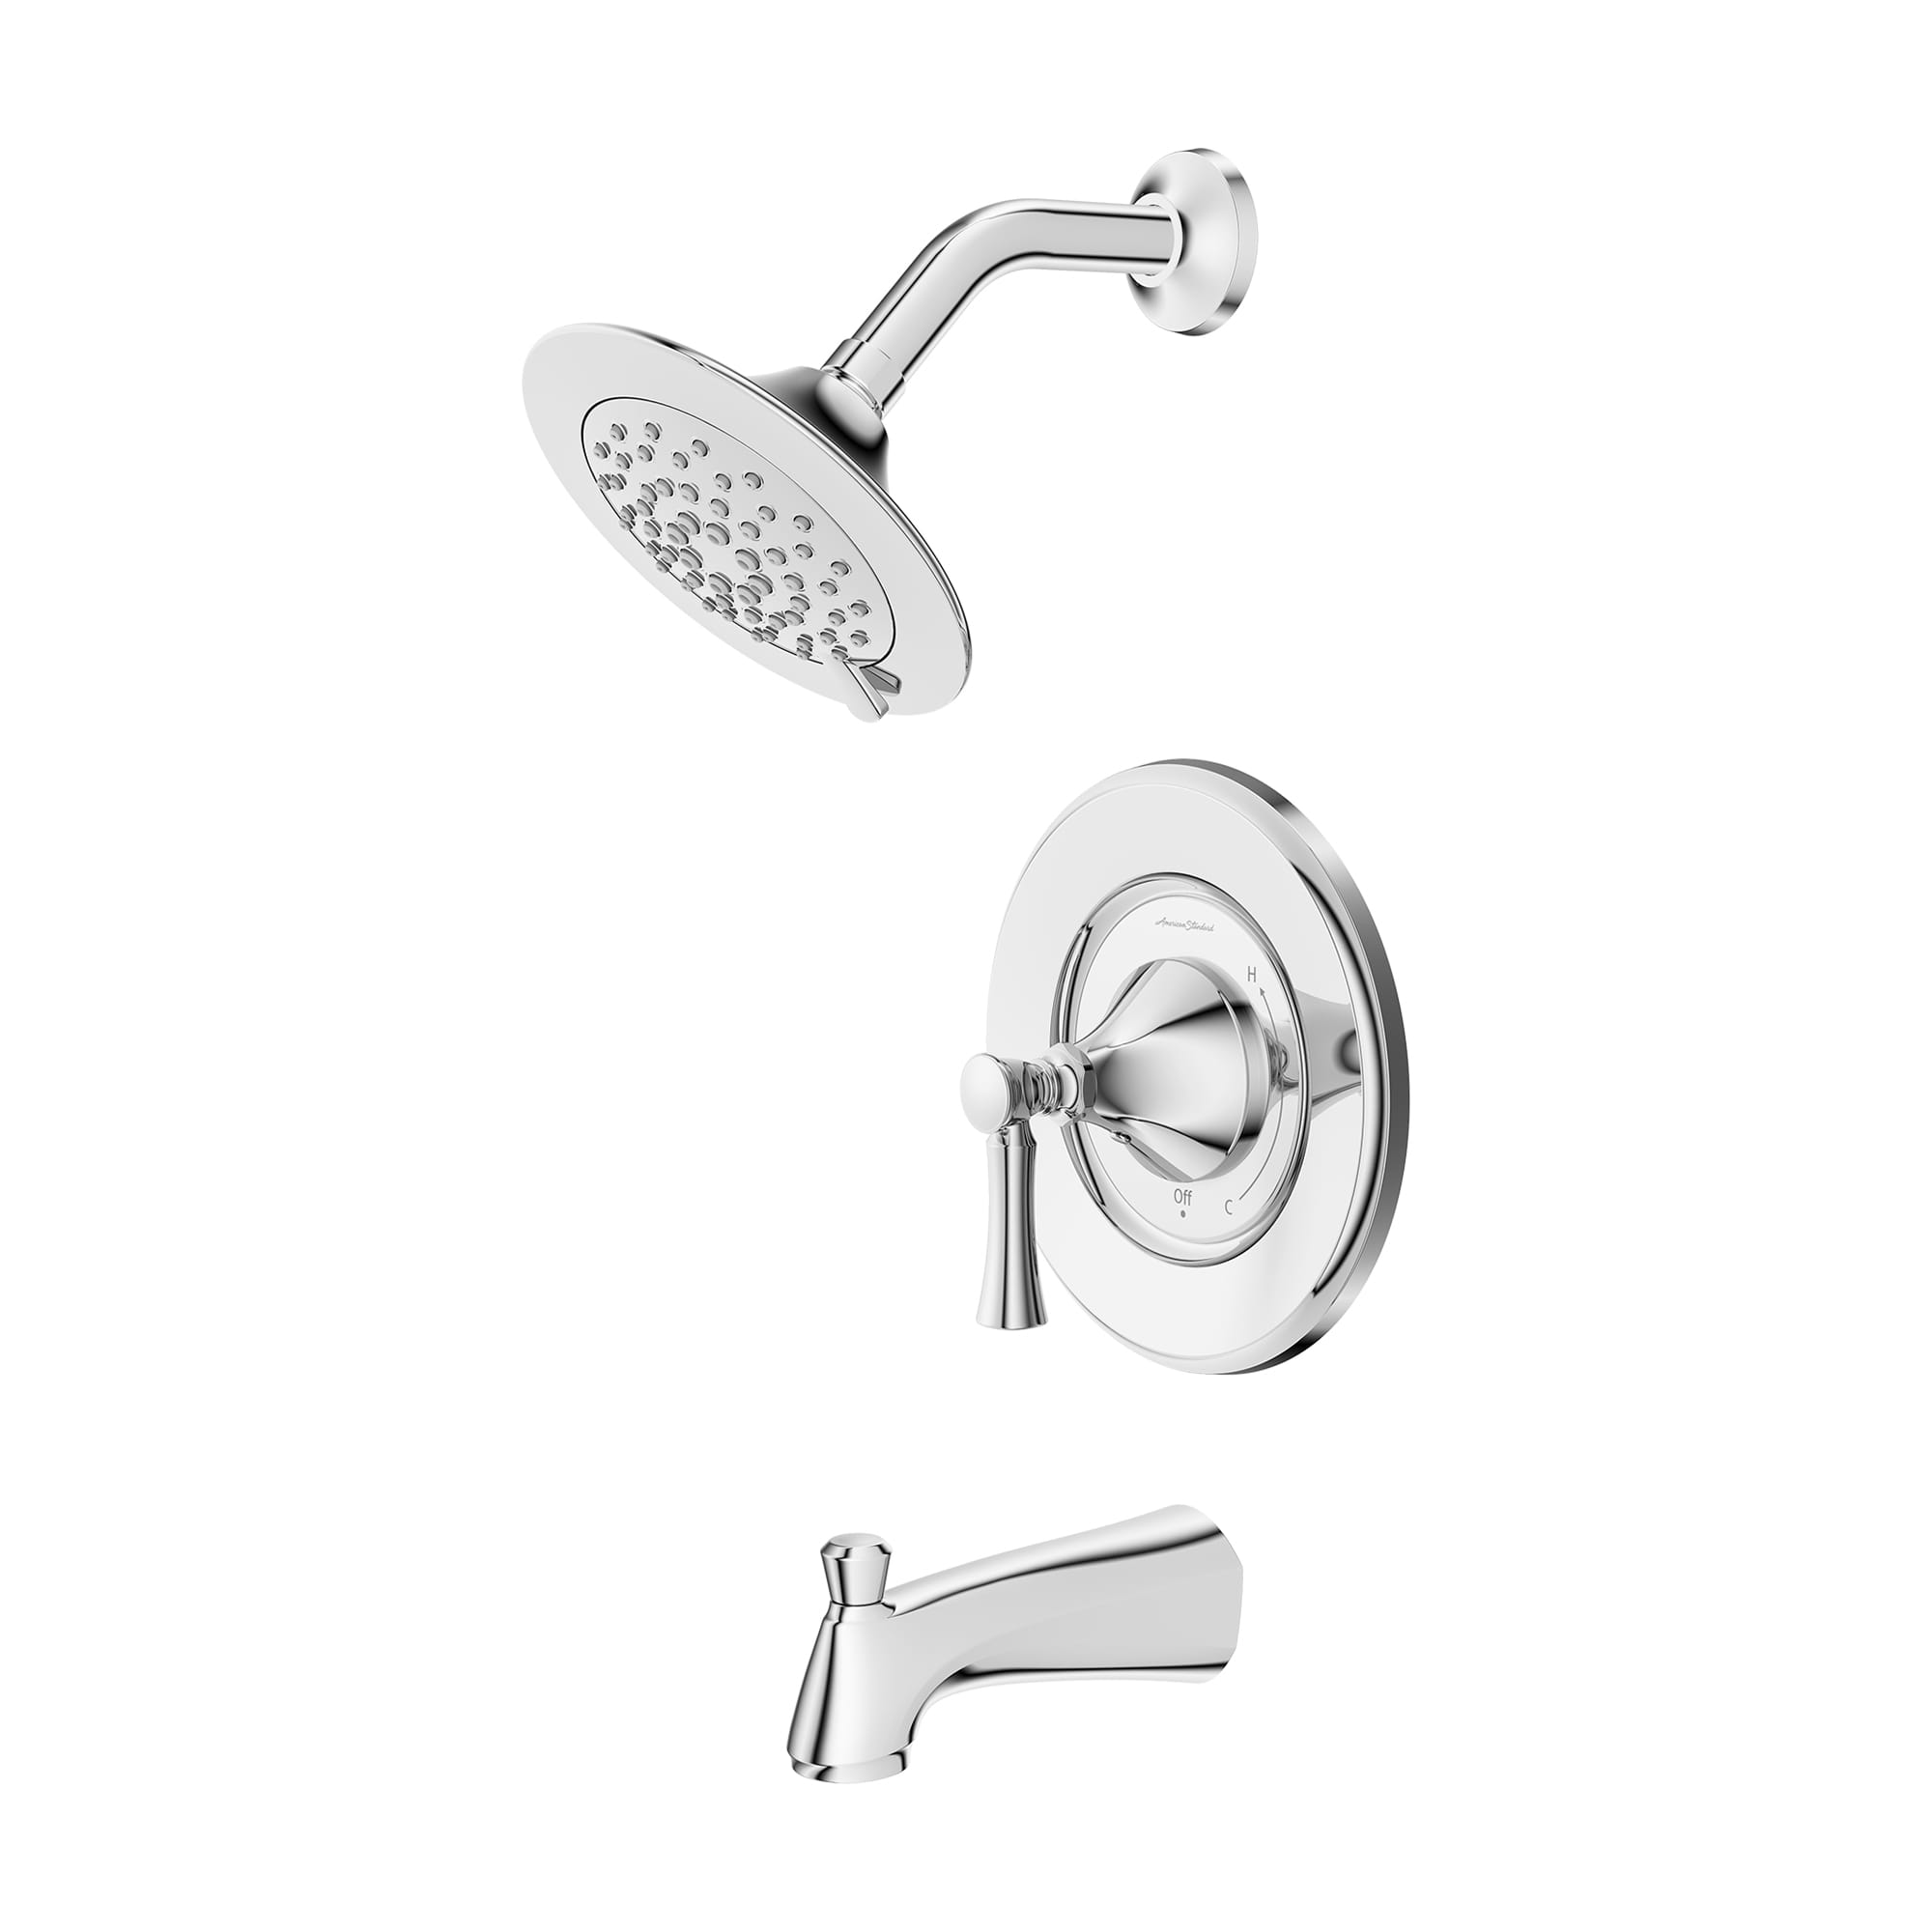 Chancellor 18 GPM Tub and Shower Trim Kit with Ceramic Disc Valve Cartridge and Lever Handle CHROME